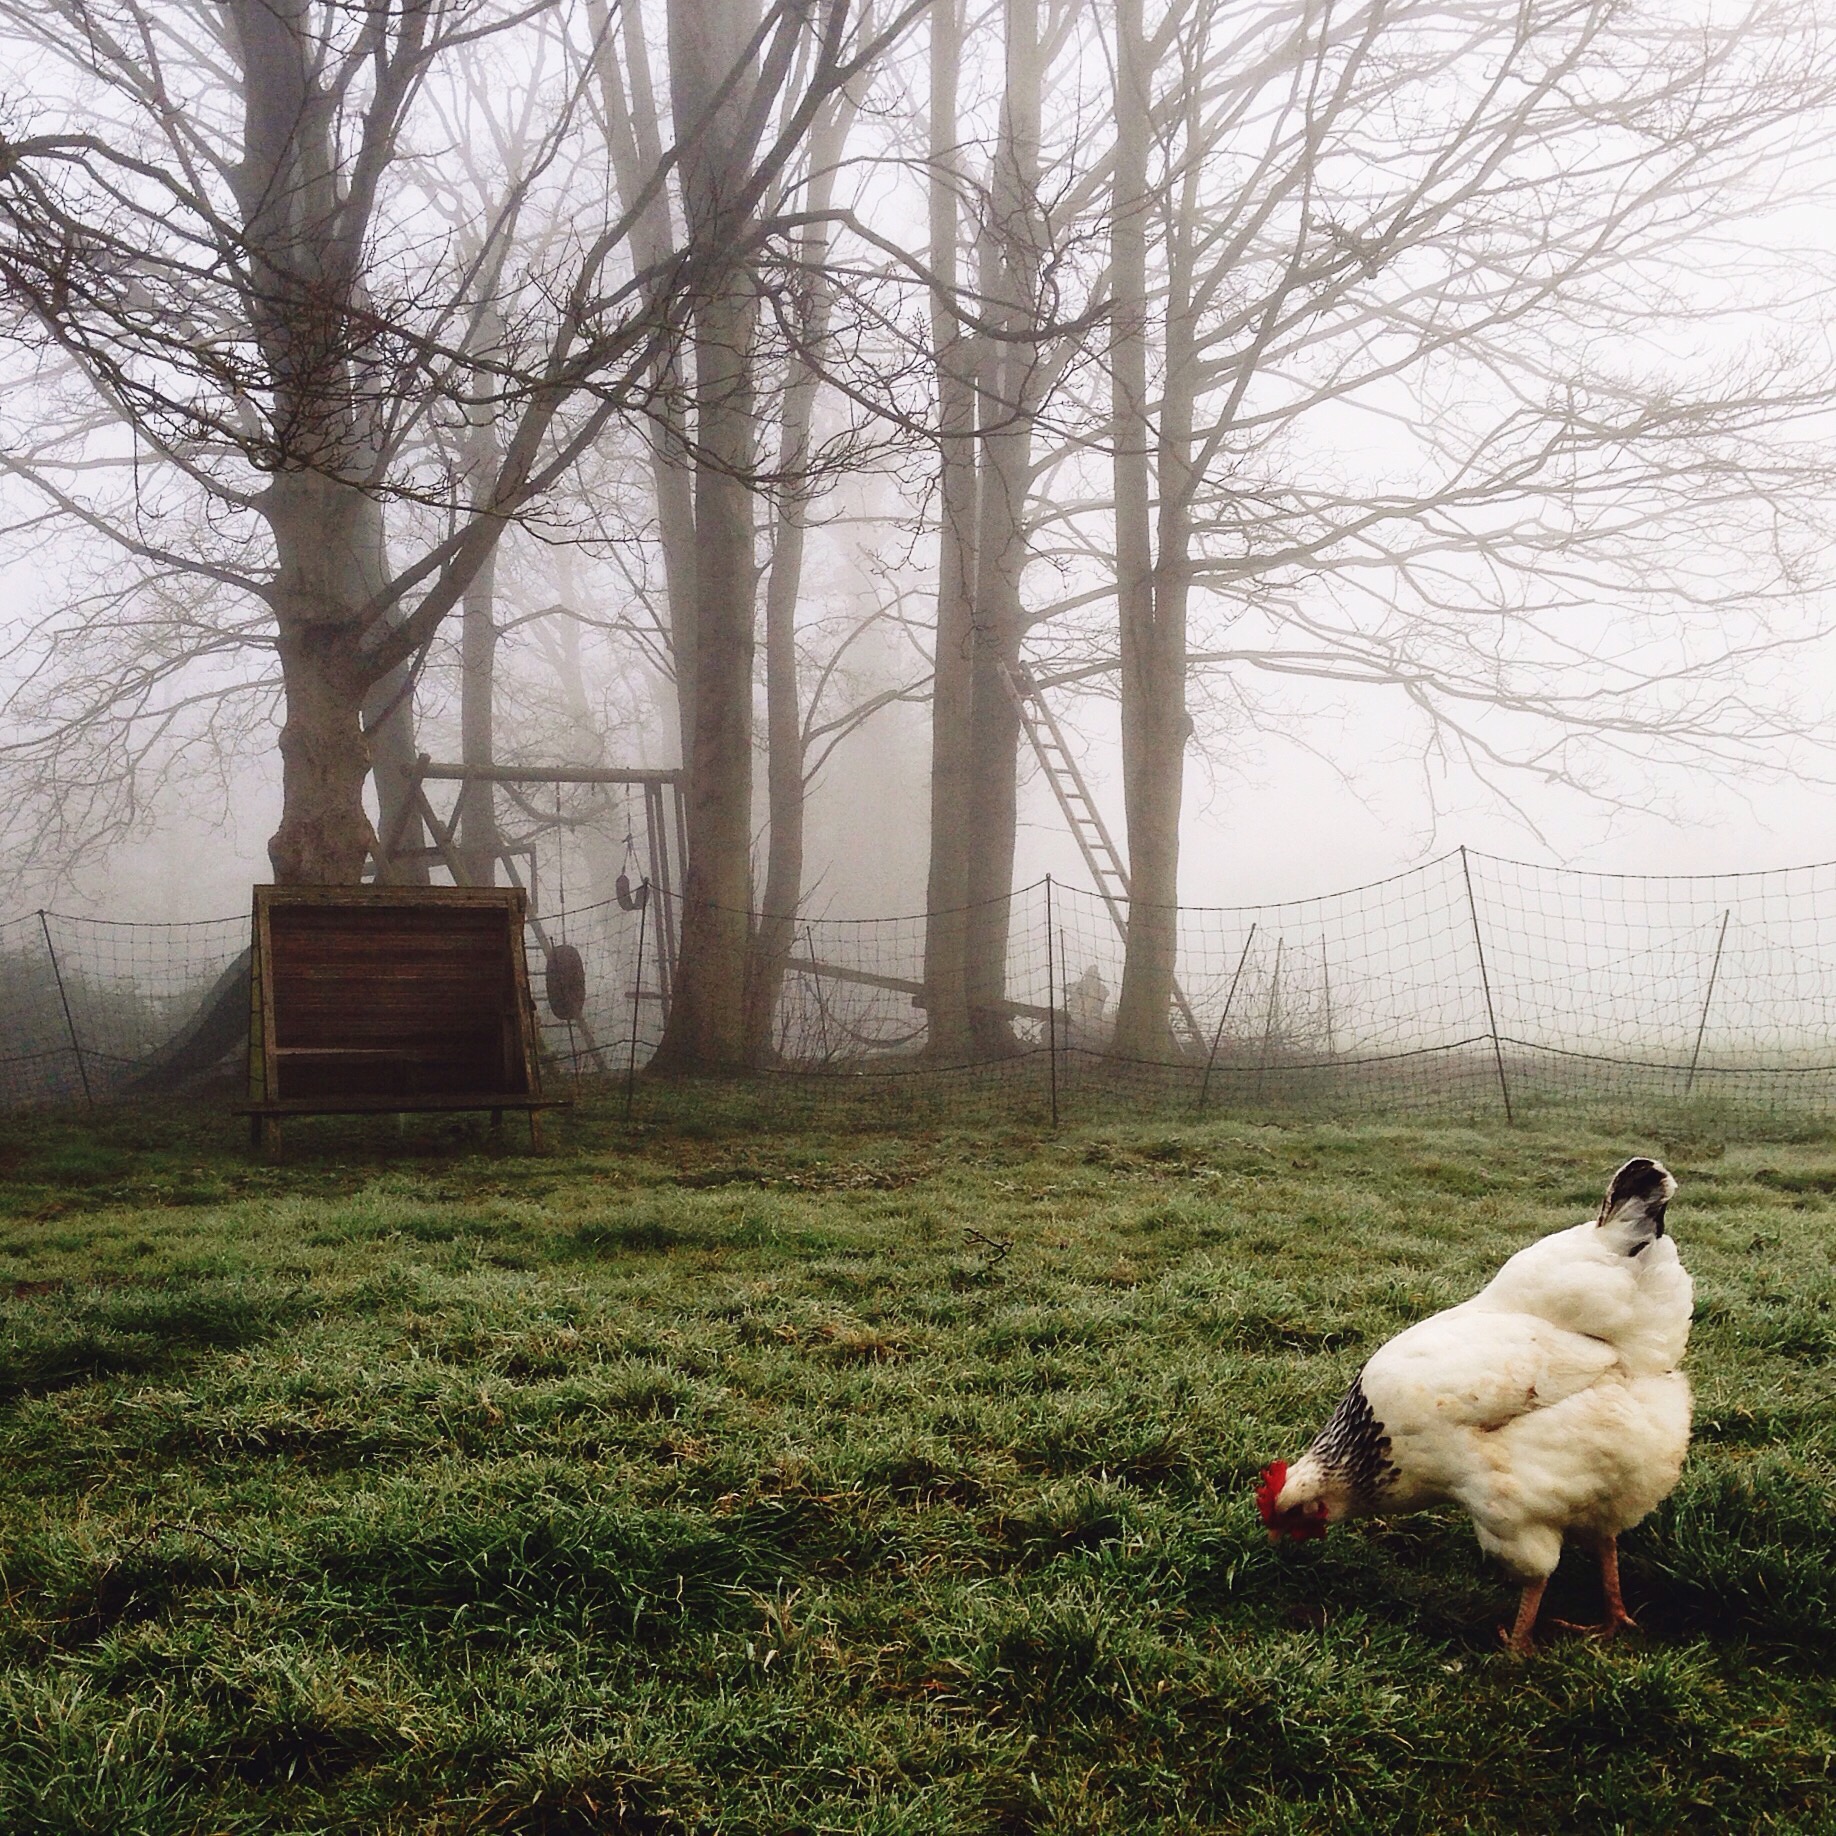 Chicken and its feathery bloomers in the fog.